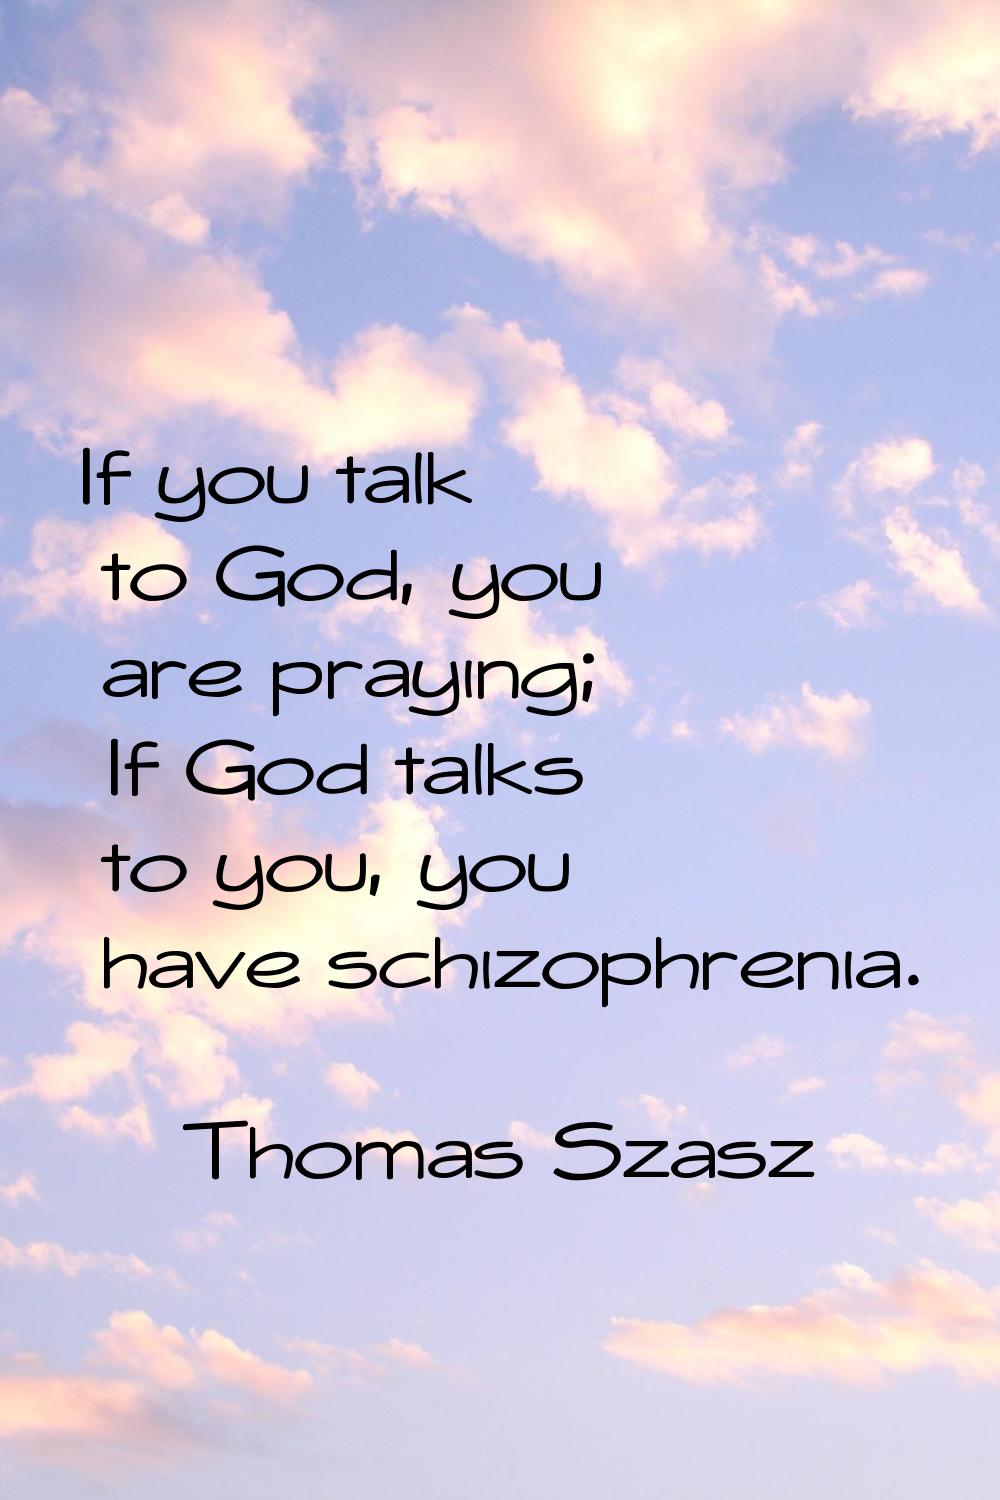 If you talk to God, you are praying; If God talks to you, you have schizophrenia.